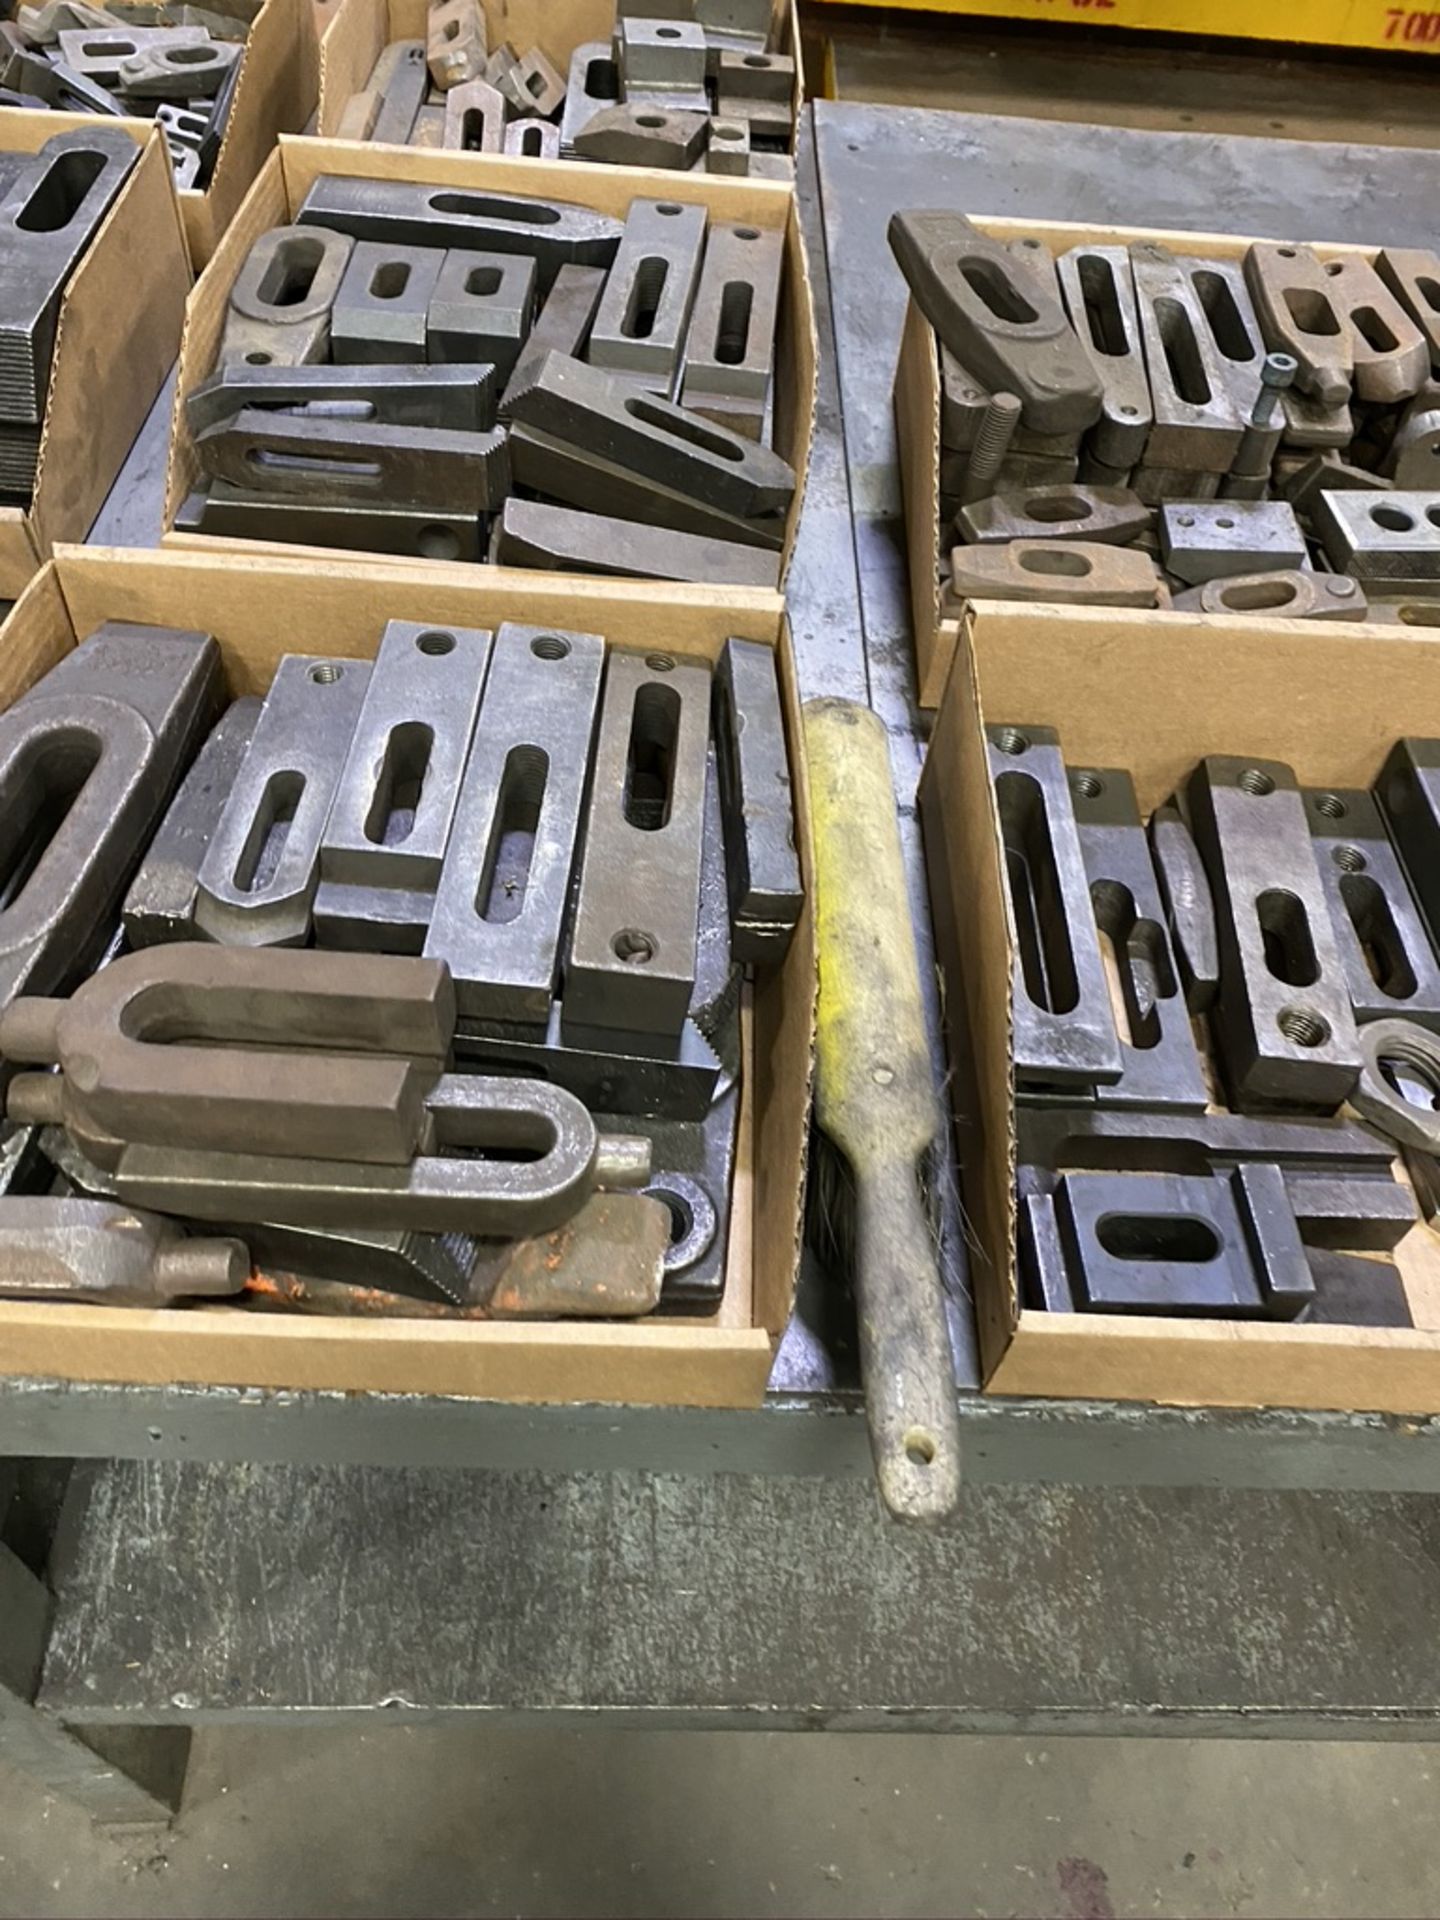 Lot-Various Hold Down Tooling in (8) Boxes, (D-14), (Yellow Tag) - Image 2 of 3